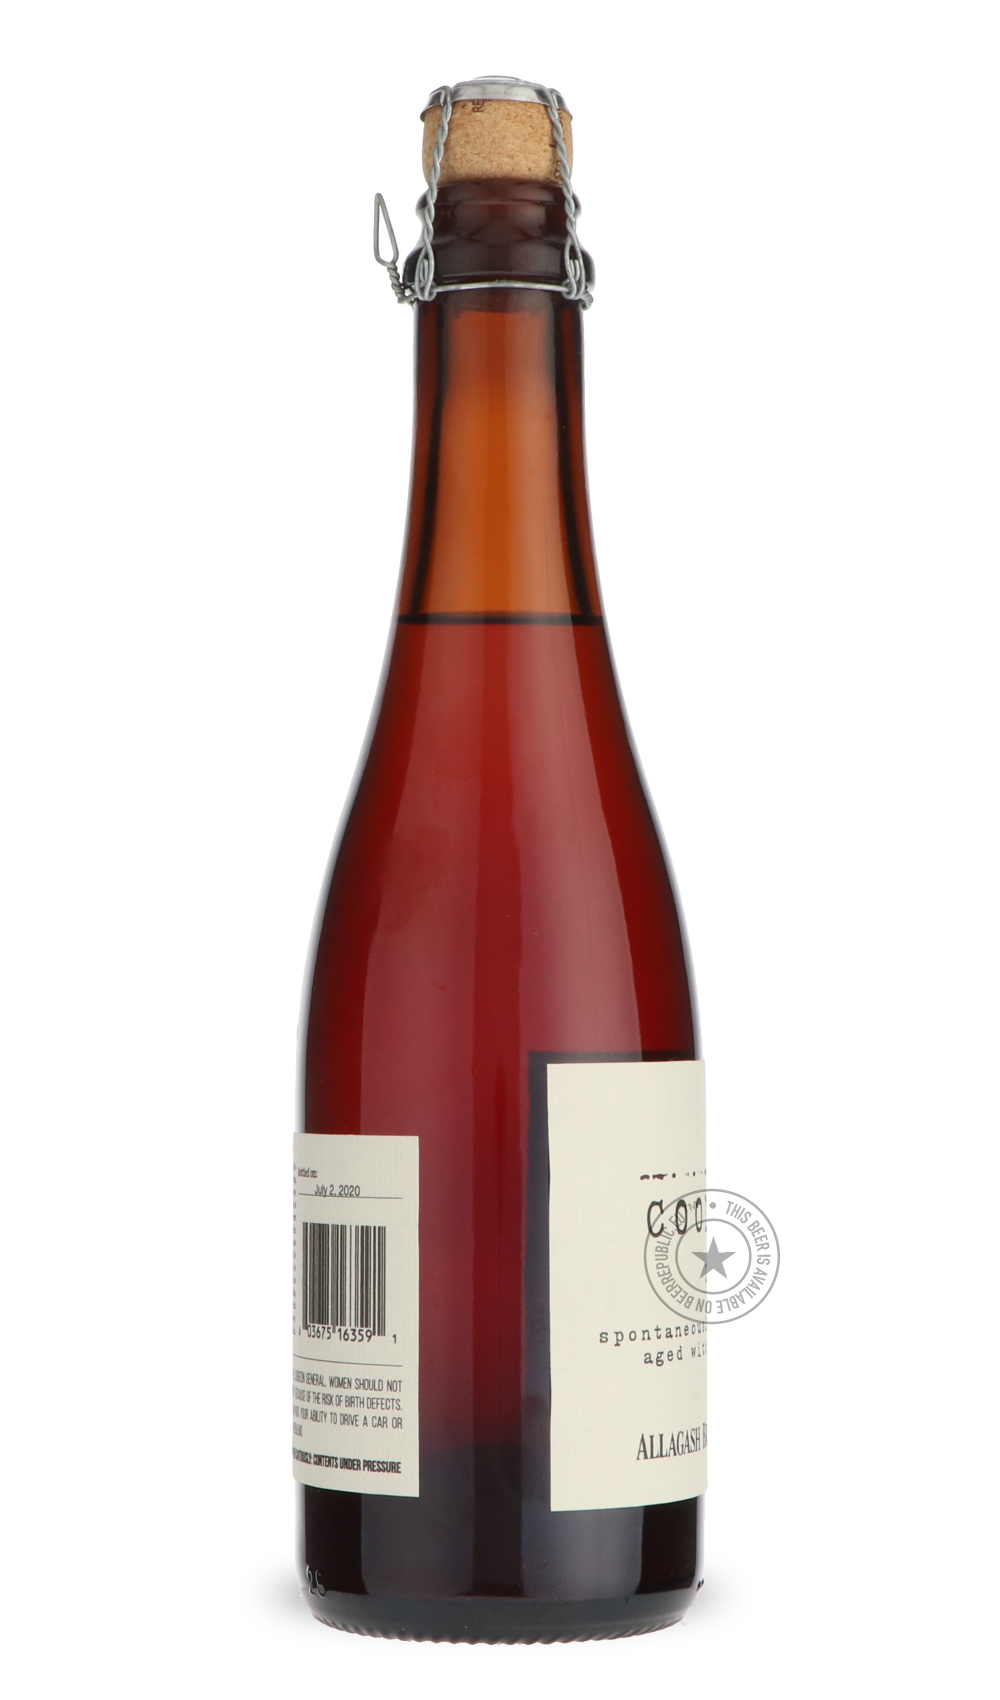 -Allagash- Coolship Red-Sour / Wild & Fruity- Only @ Beer Republic - The best online beer store for American & Canadian craft beer - Buy beer online from the USA and Canada - Bier online kopen - Amerikaans bier kopen - Craft beer store - Craft beer kopen - Amerikanisch bier kaufen - Bier online kaufen - Acheter biere online - IPA - Stout - Porter - New England IPA - Hazy IPA - Imperial Stout - Barrel Aged - Barrel Aged Imperial Stout - Brown - Dark beer - Blond - Blonde - Pilsner - Lager - Wheat - Weizen - 